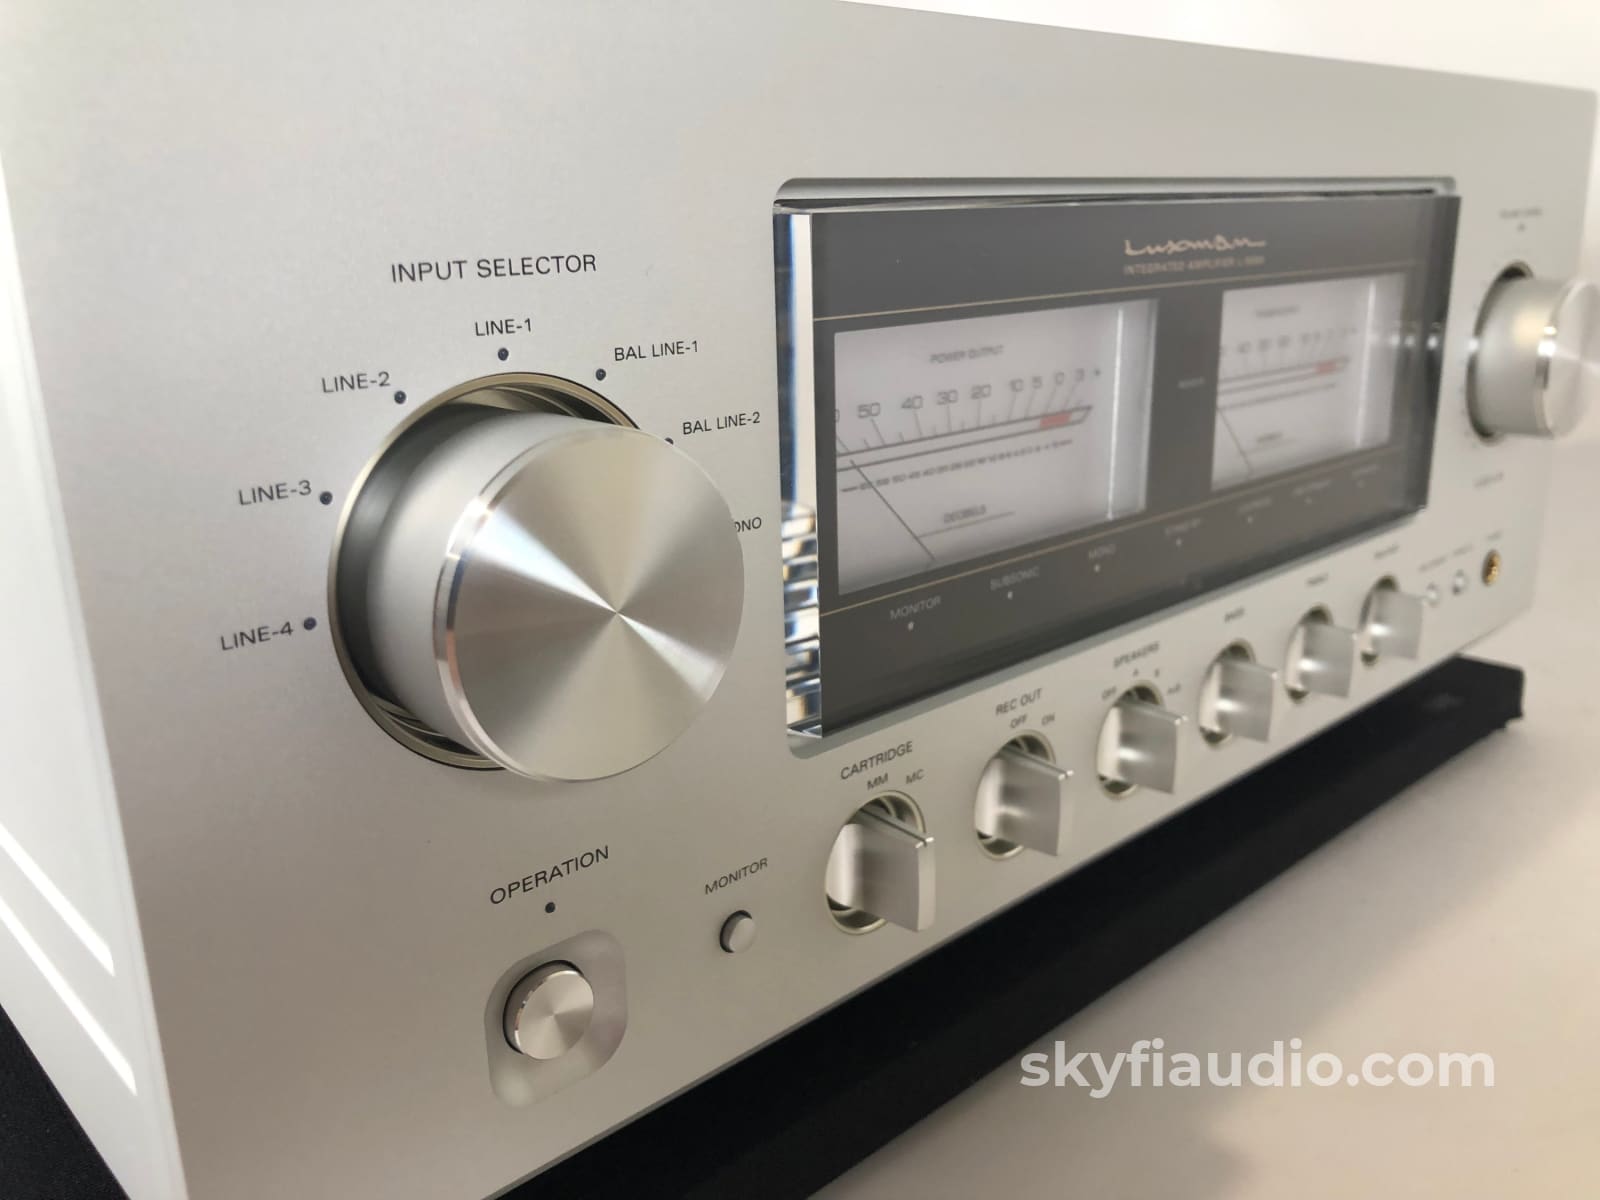 Luxman L-509X Integrated Amplifier With Phono - As New